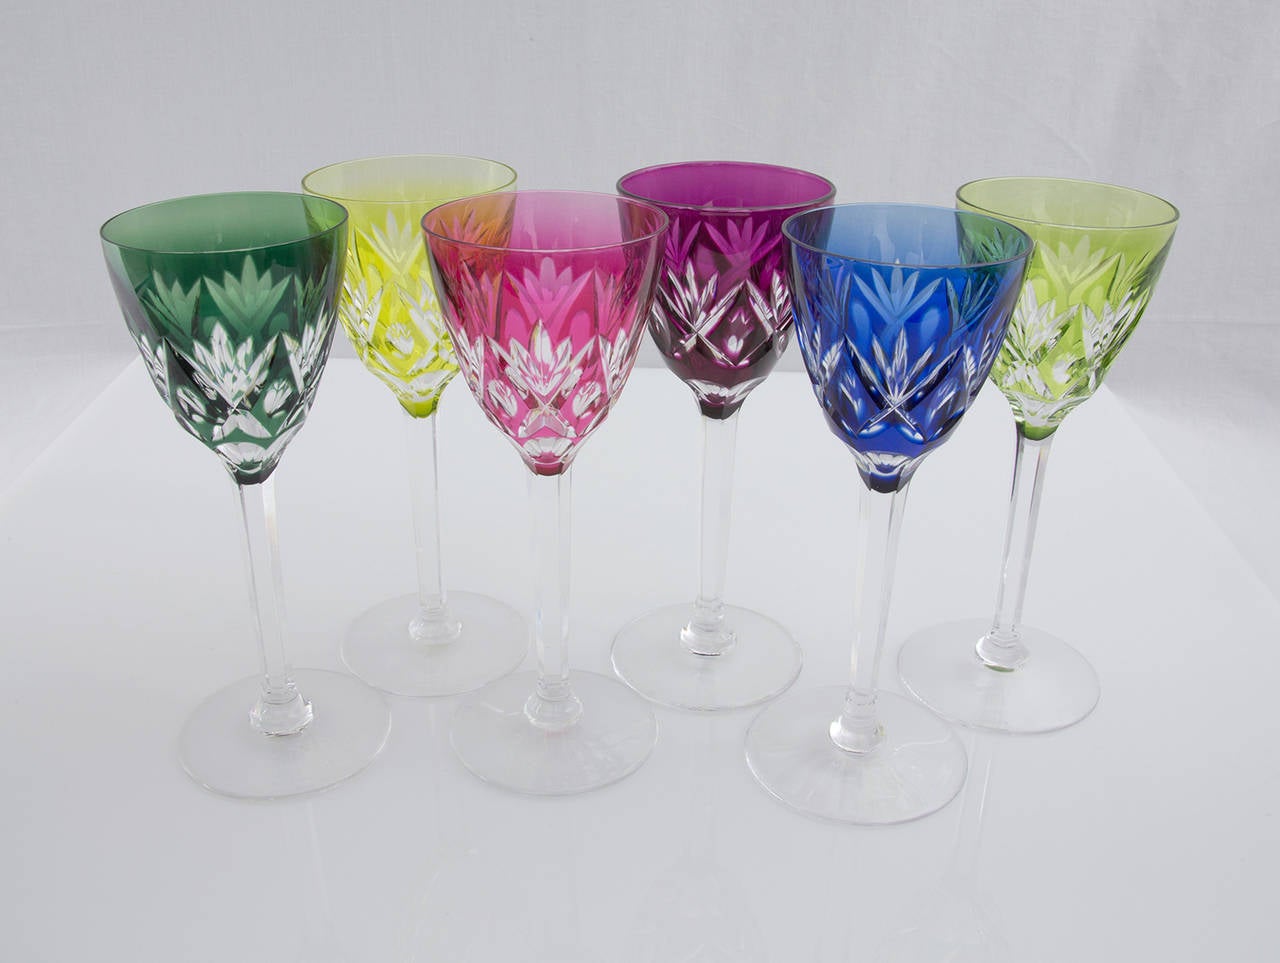 Beautiful set of six tall stemmed colored wine glasses featuring a hand-cut-to-clear pattern by famed Belgian glass maker Val St. Lambert. Each glass measures approx. 7.5” tall and one glass is signed Val St. Lambert, circa 1950s.